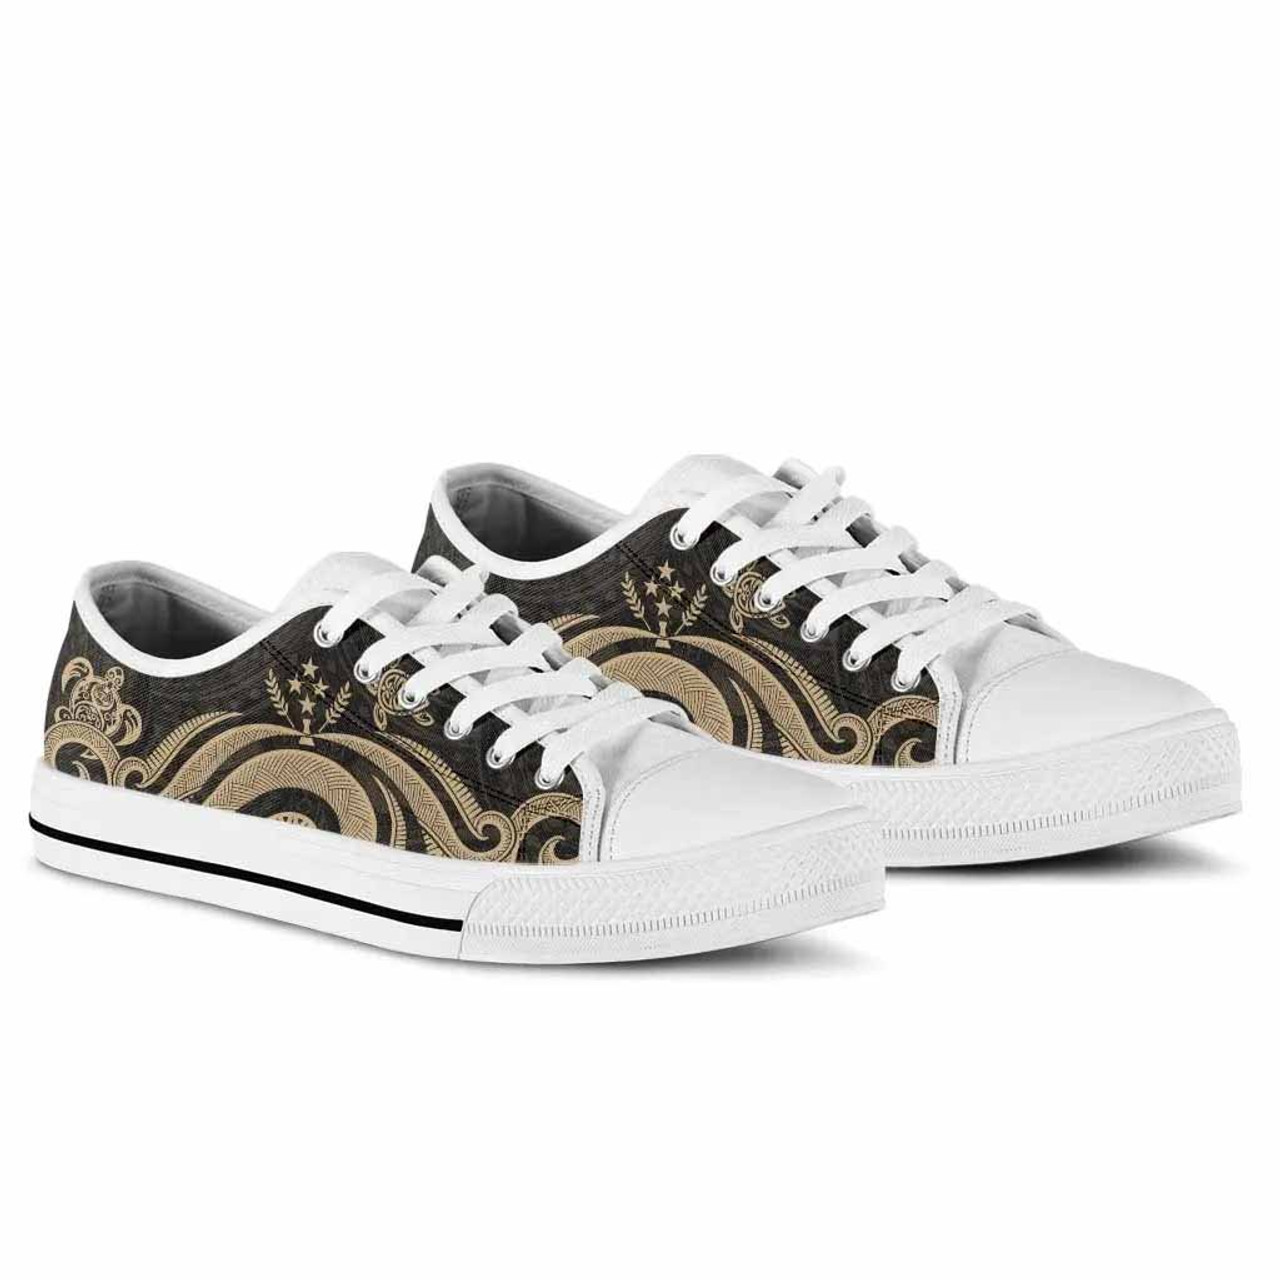 Kosrae Low Top Canvas Shoes - Gold Tentacle Turtle 5